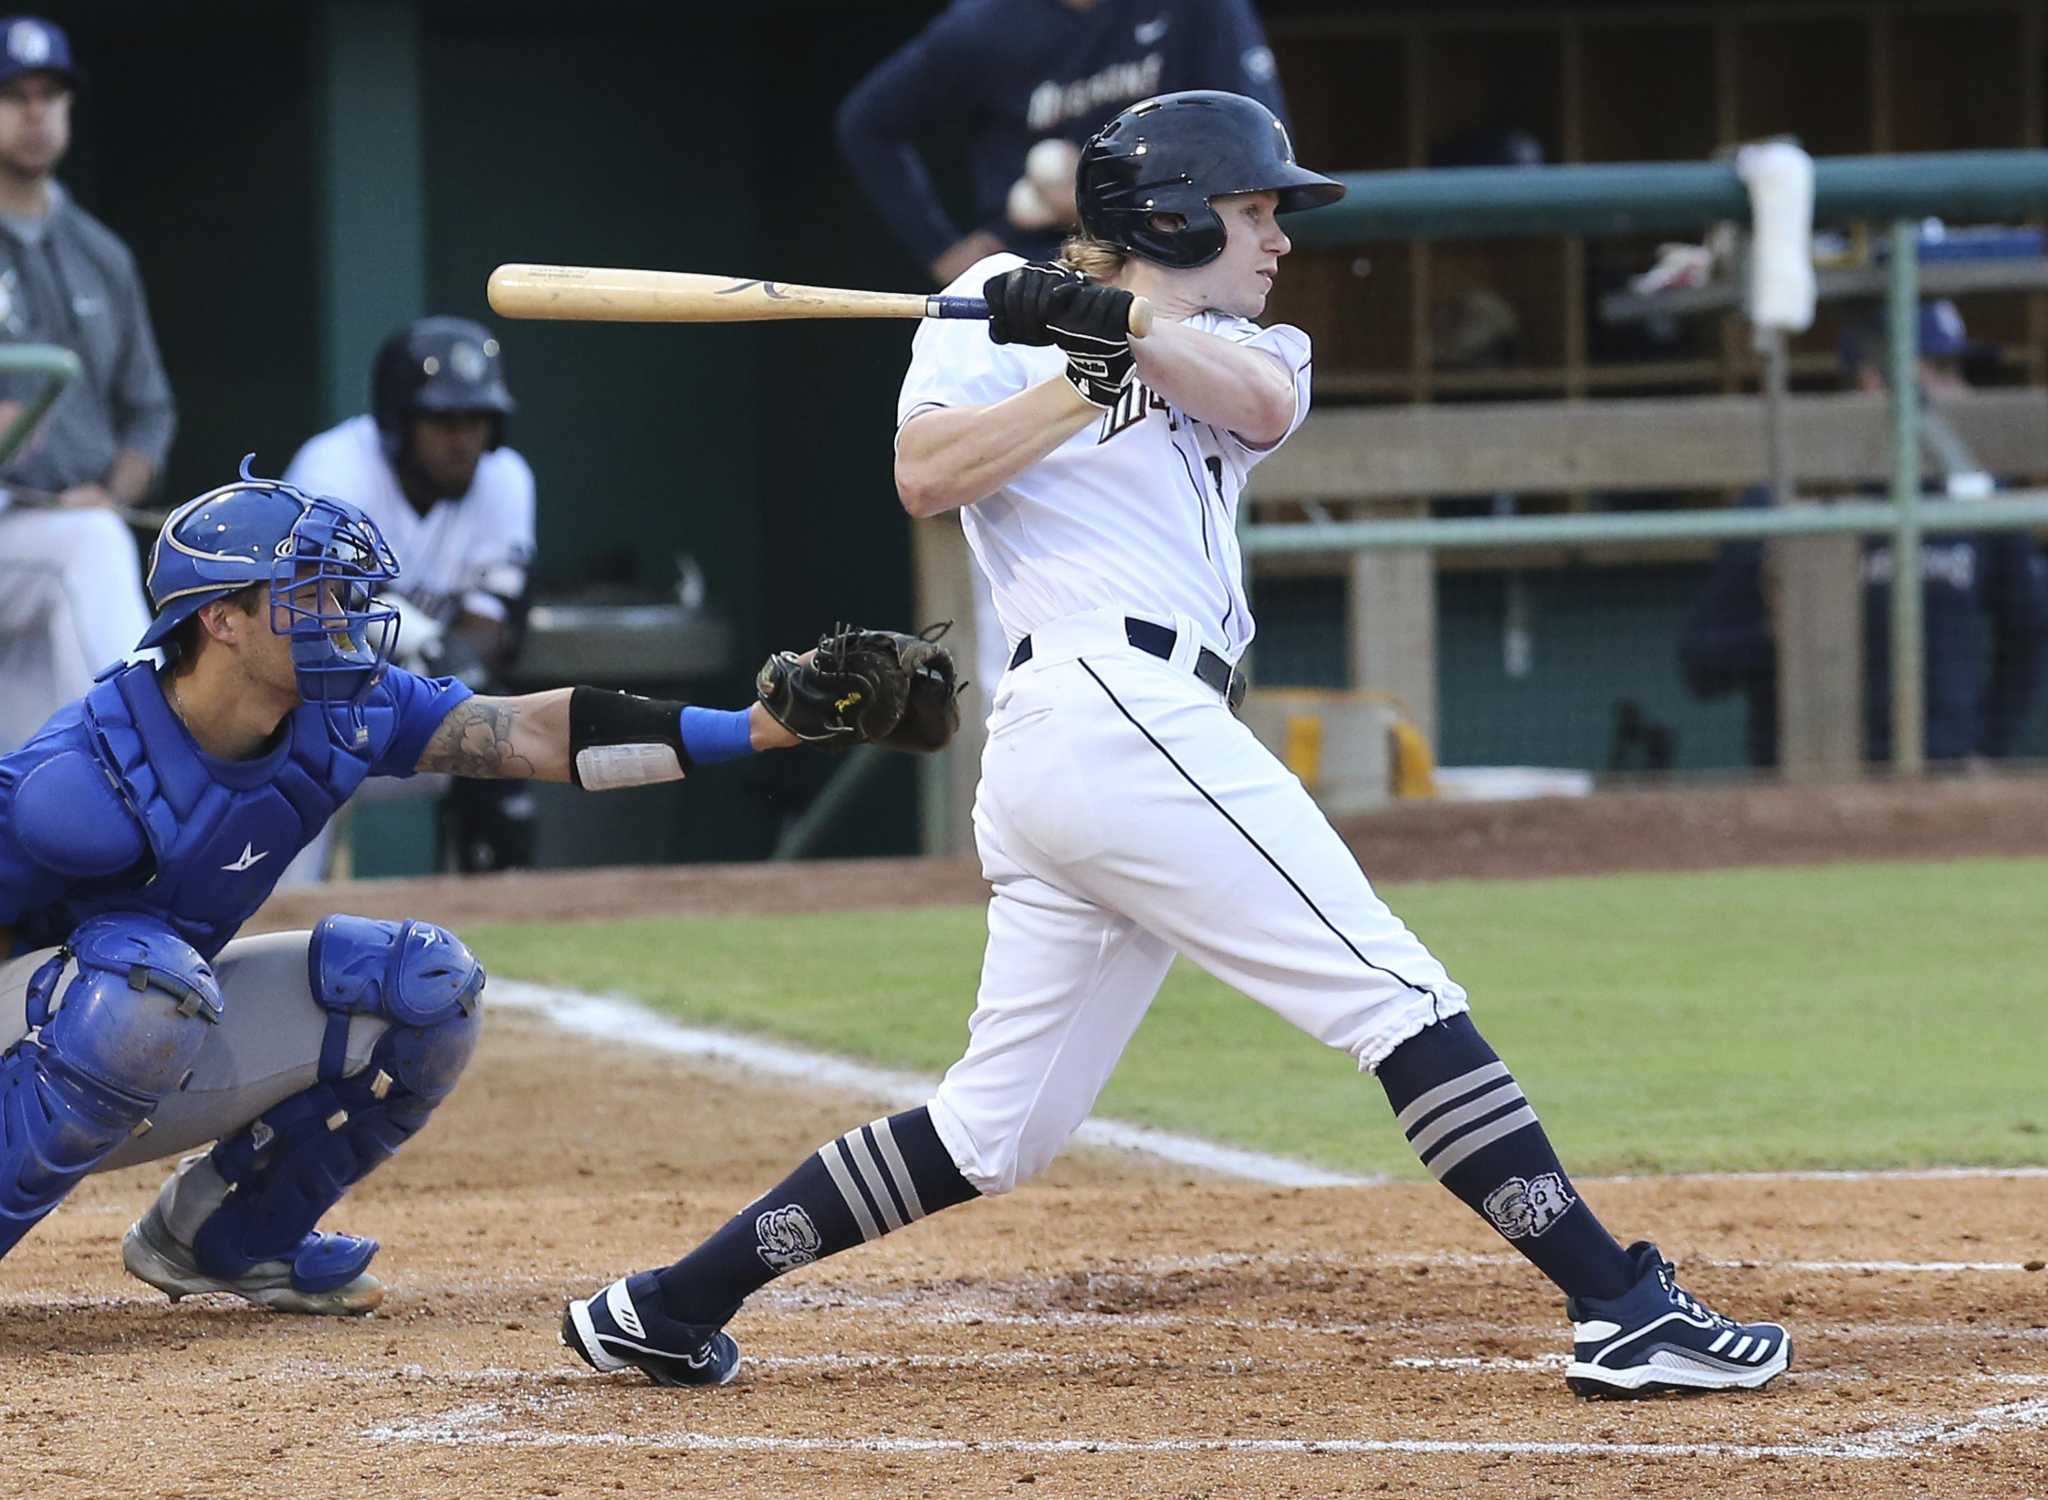 Touching base: Missions lose top hitter Suwinski to trade, brace for  possibility of more moves to come